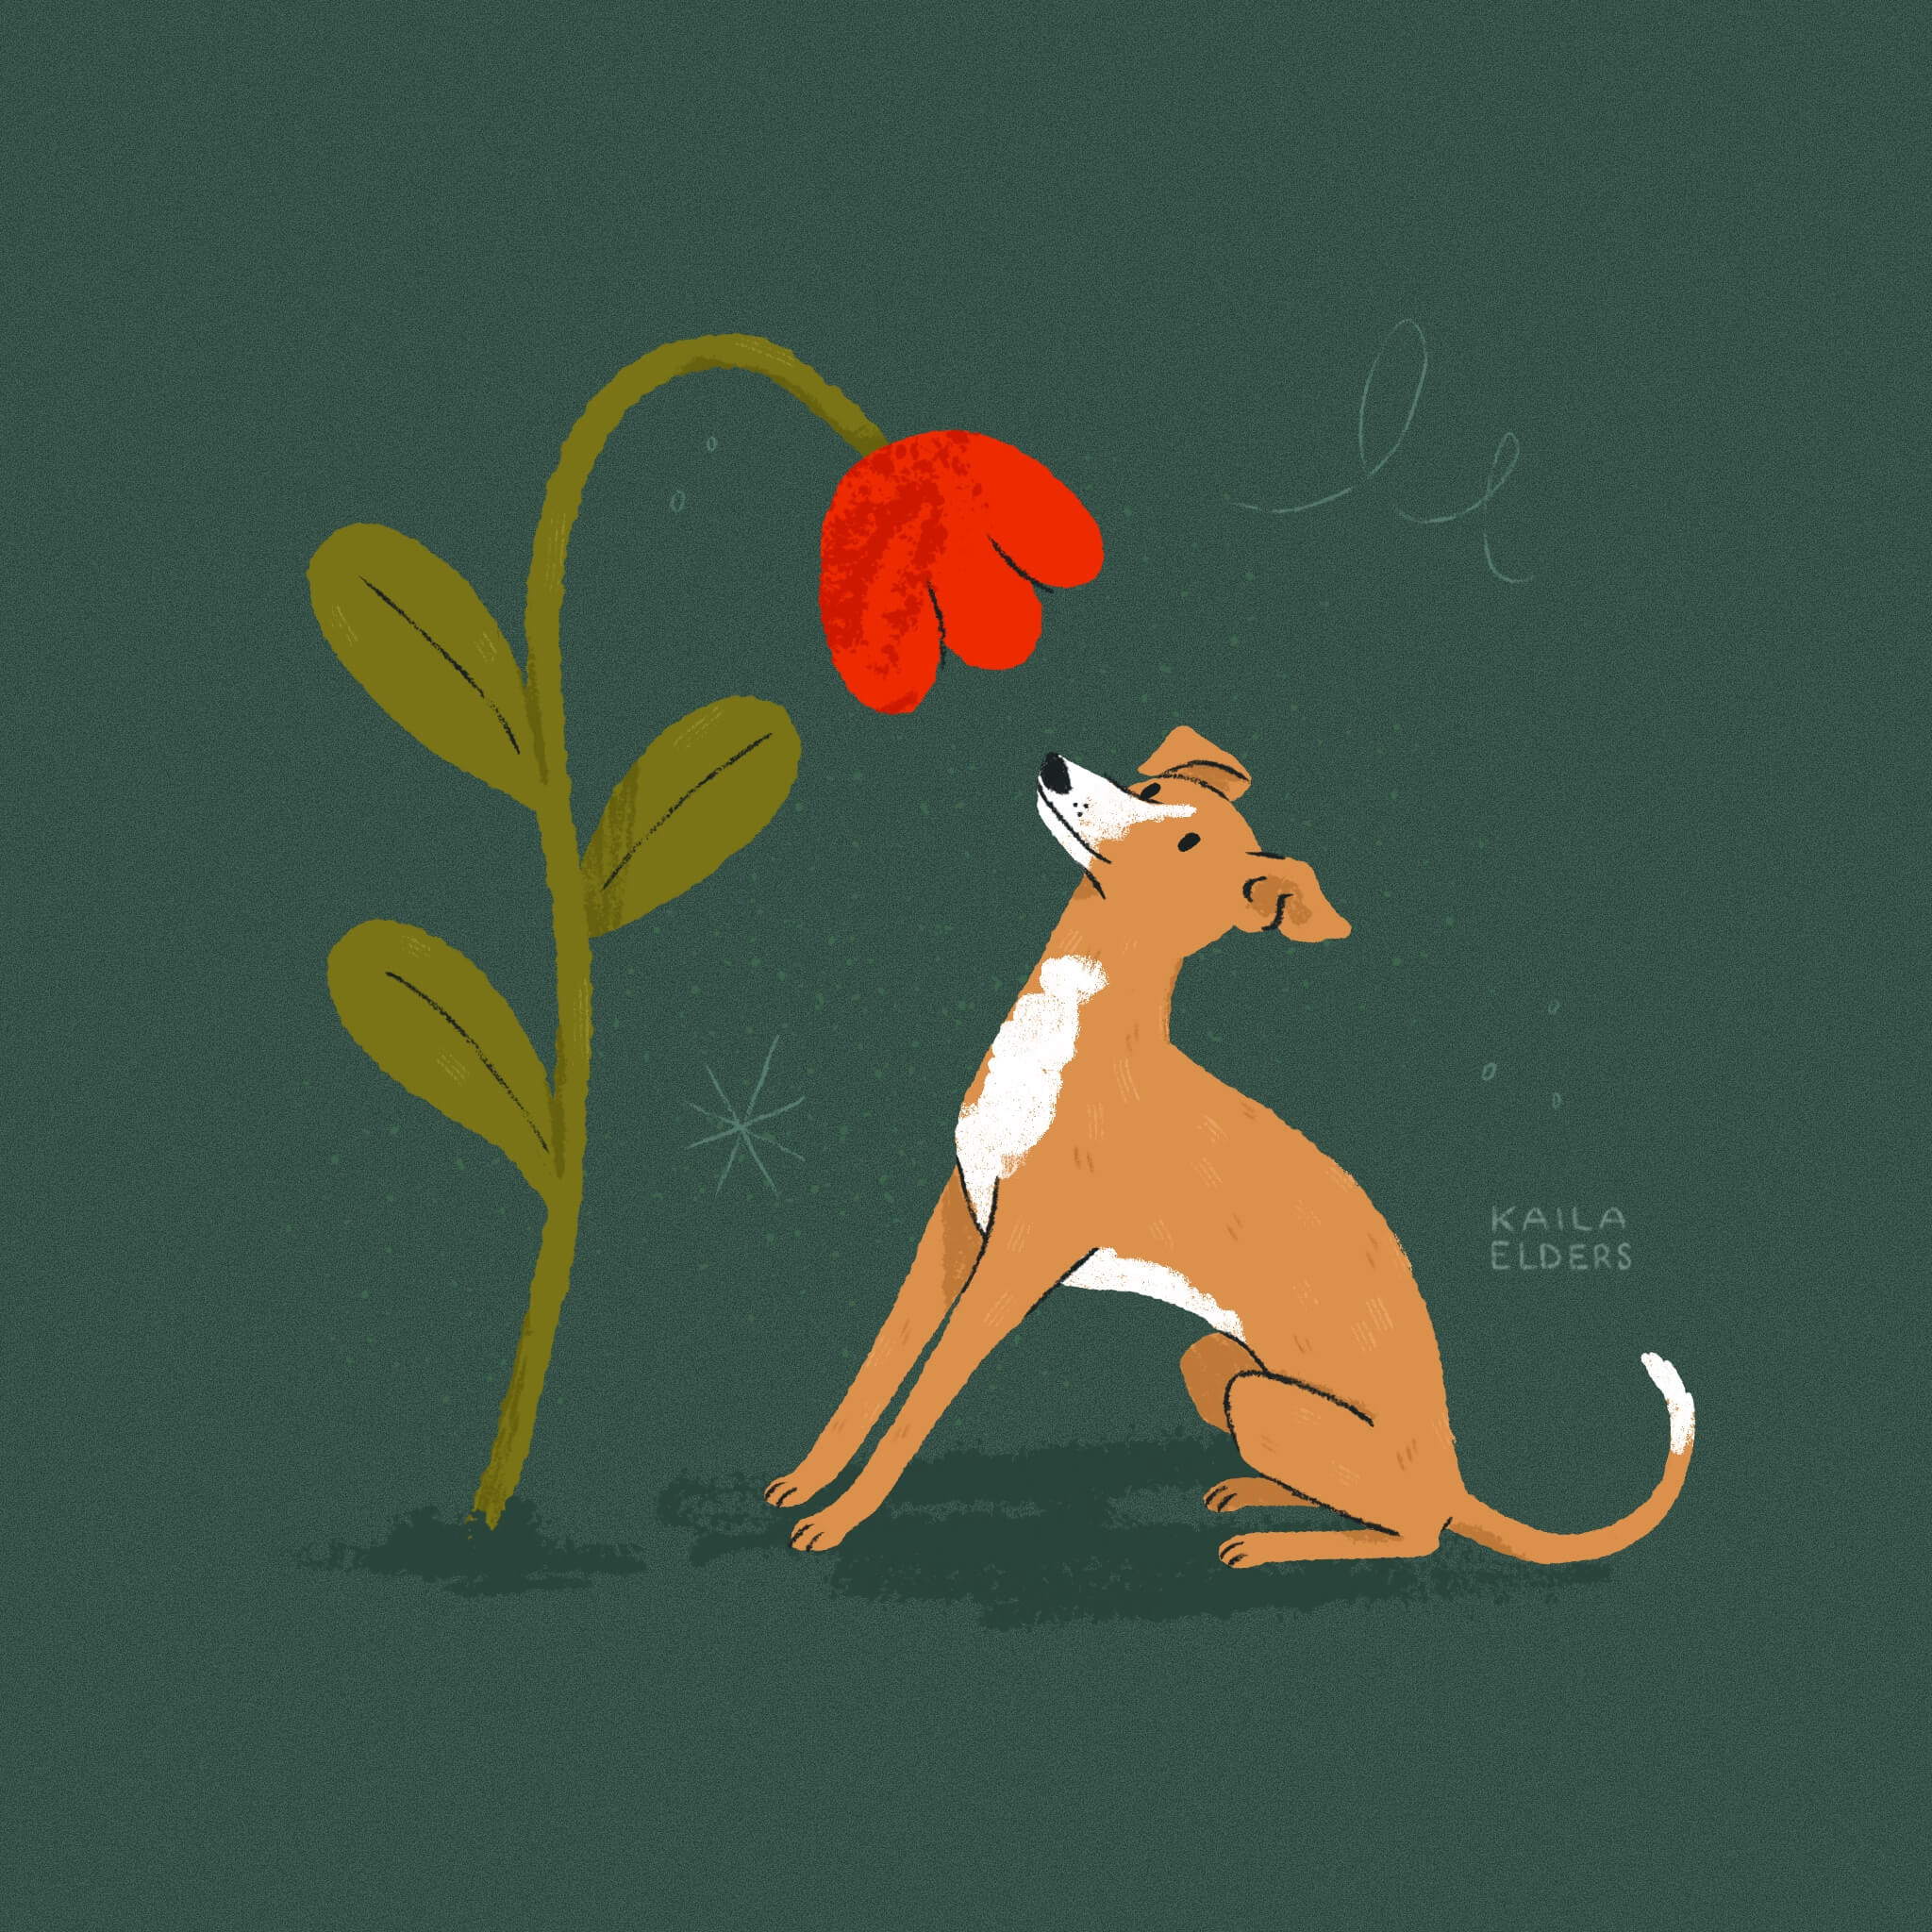 An illustration of a tan and white Italian Greyhound sitting and leaning backwards to smell a large red flower that’s looming over it. The background is a dark foresty green.